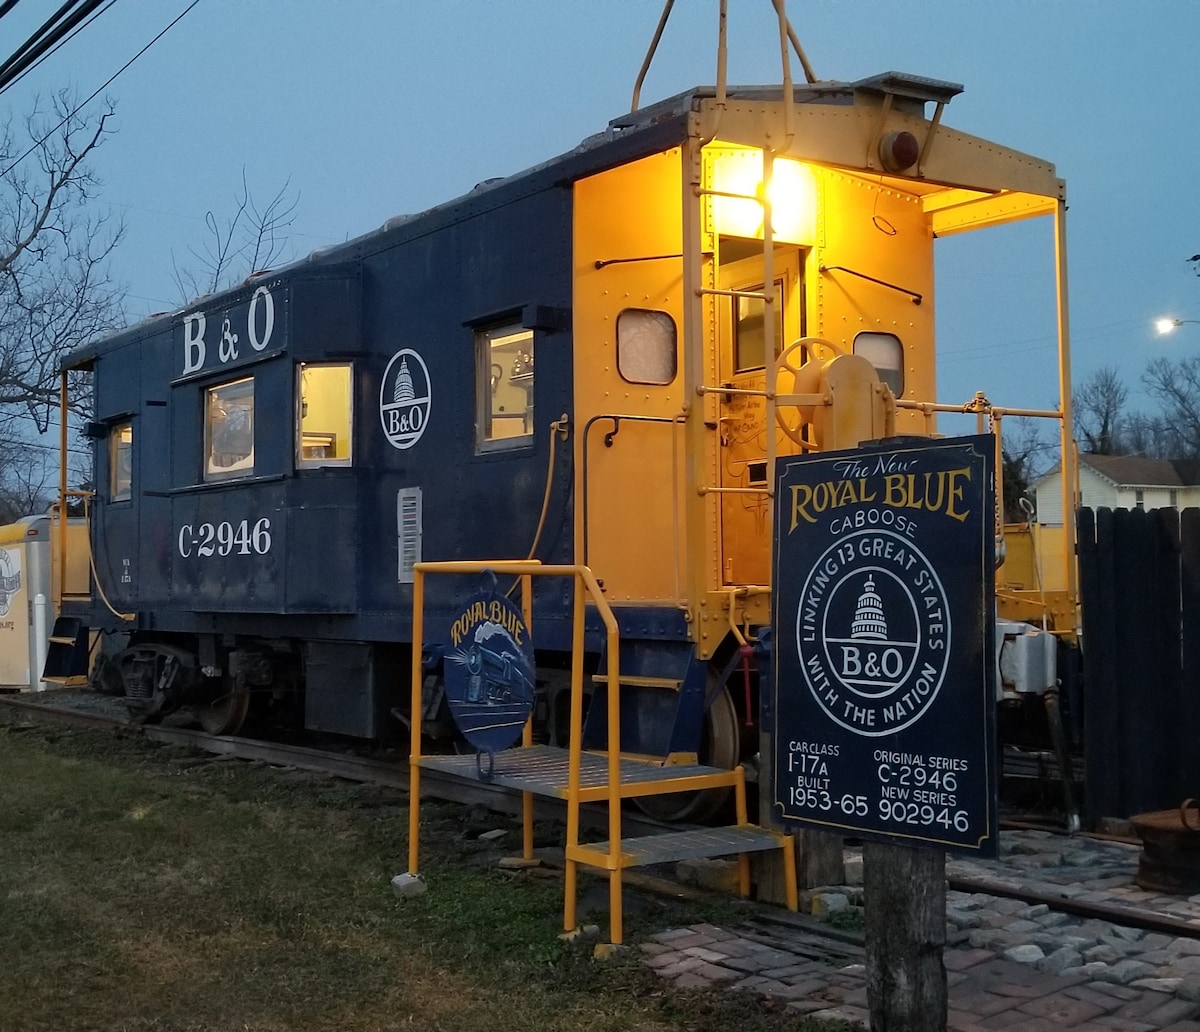 ROYAL BLUE CABOOSE at Annapolis Junction Md. 20724